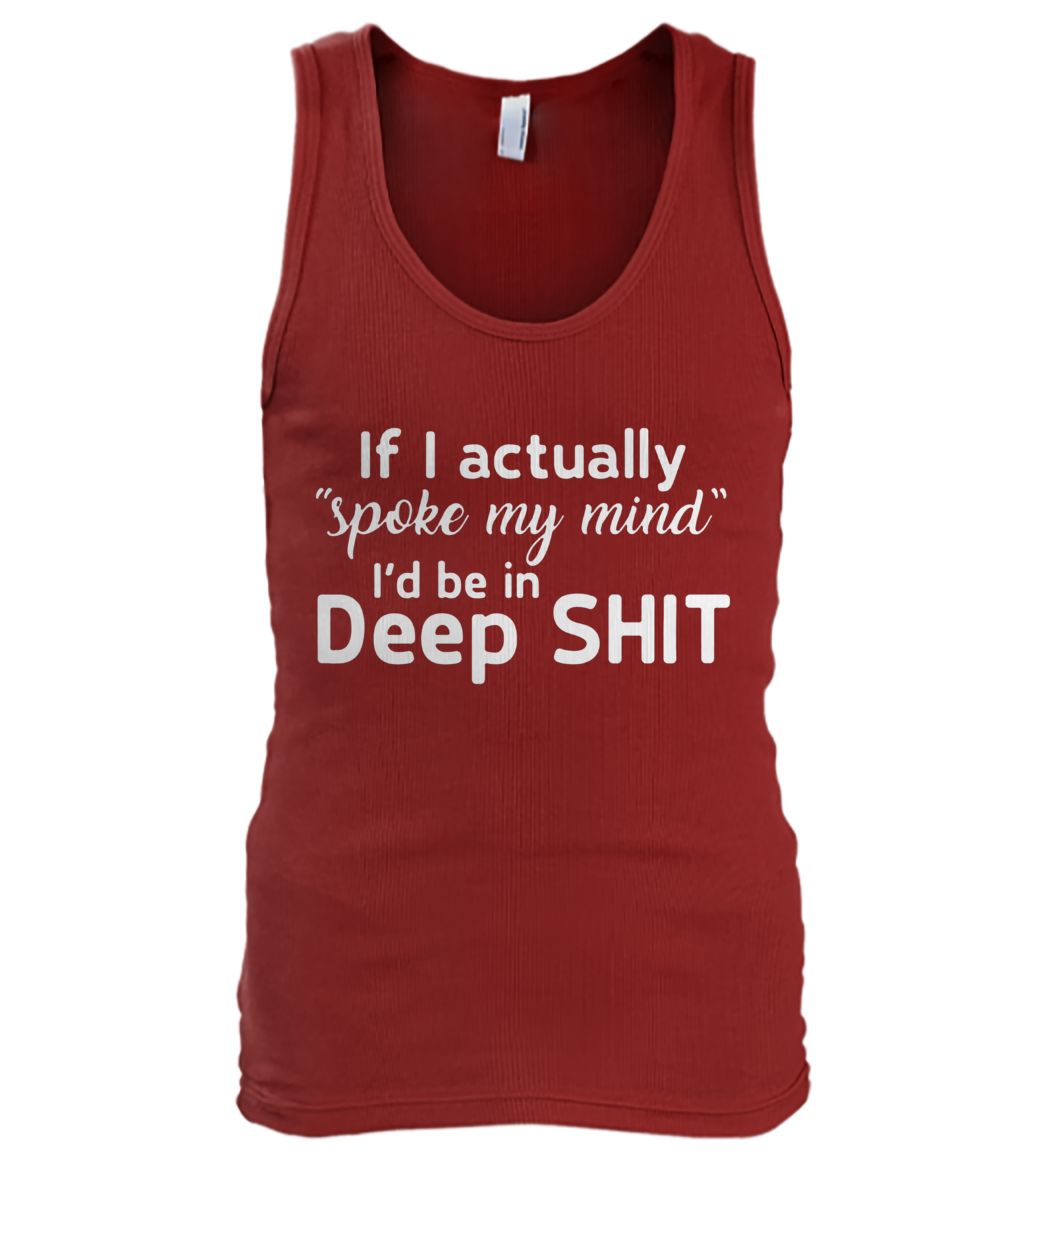 If I actually spoke my mind I'd be in deep shit men's tank top